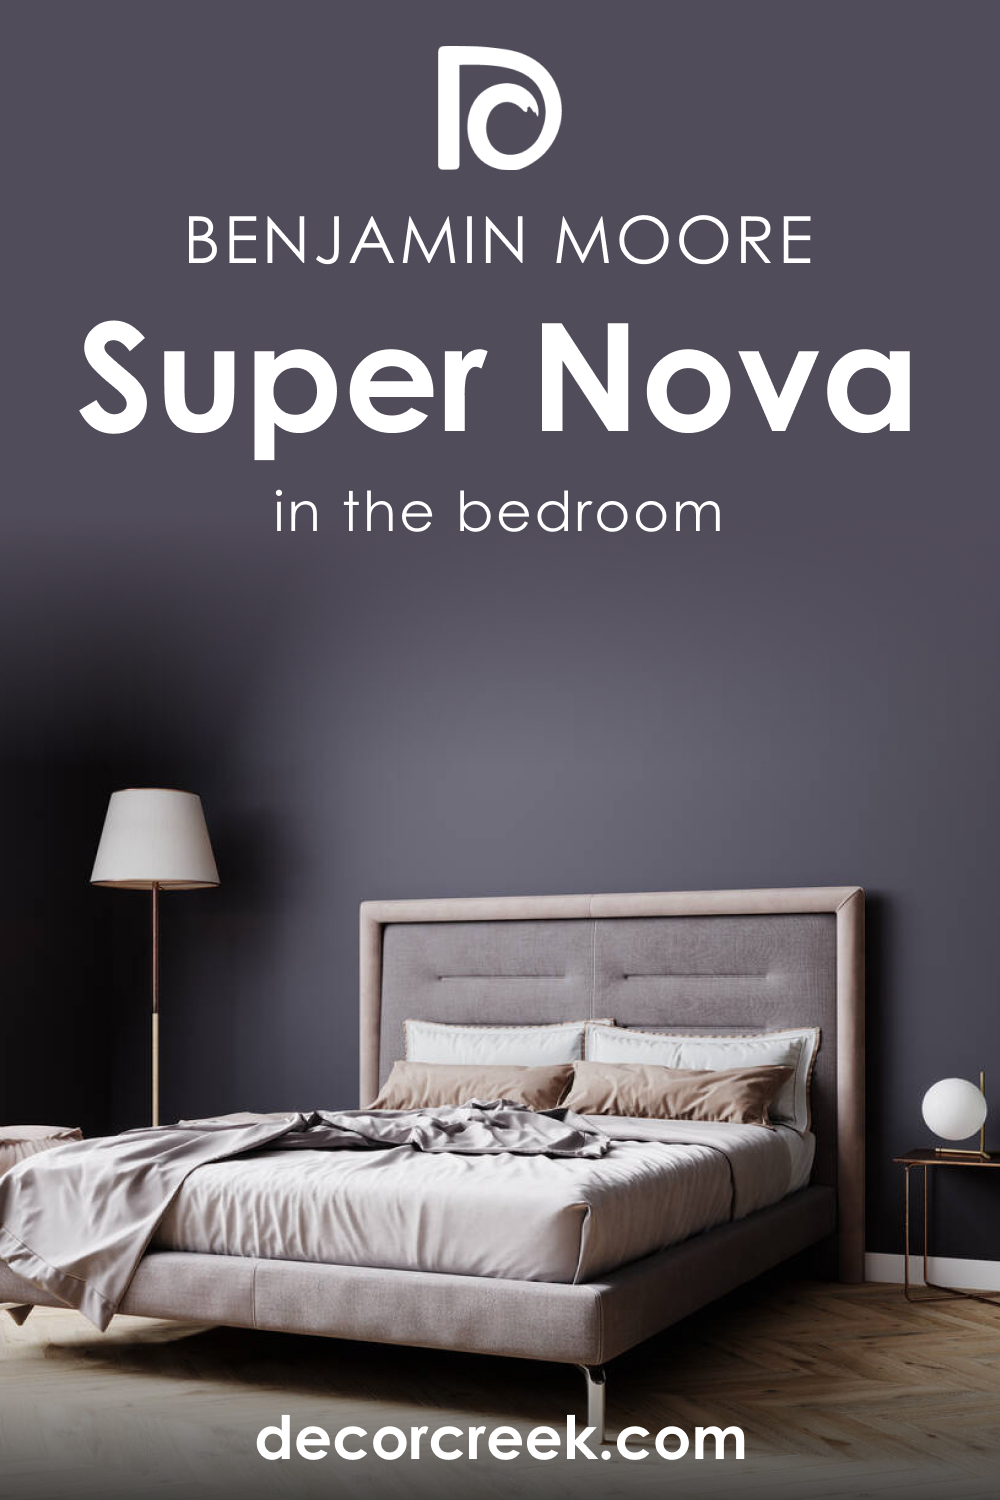 How to Use Super Nova 1414 in the Bedroom?